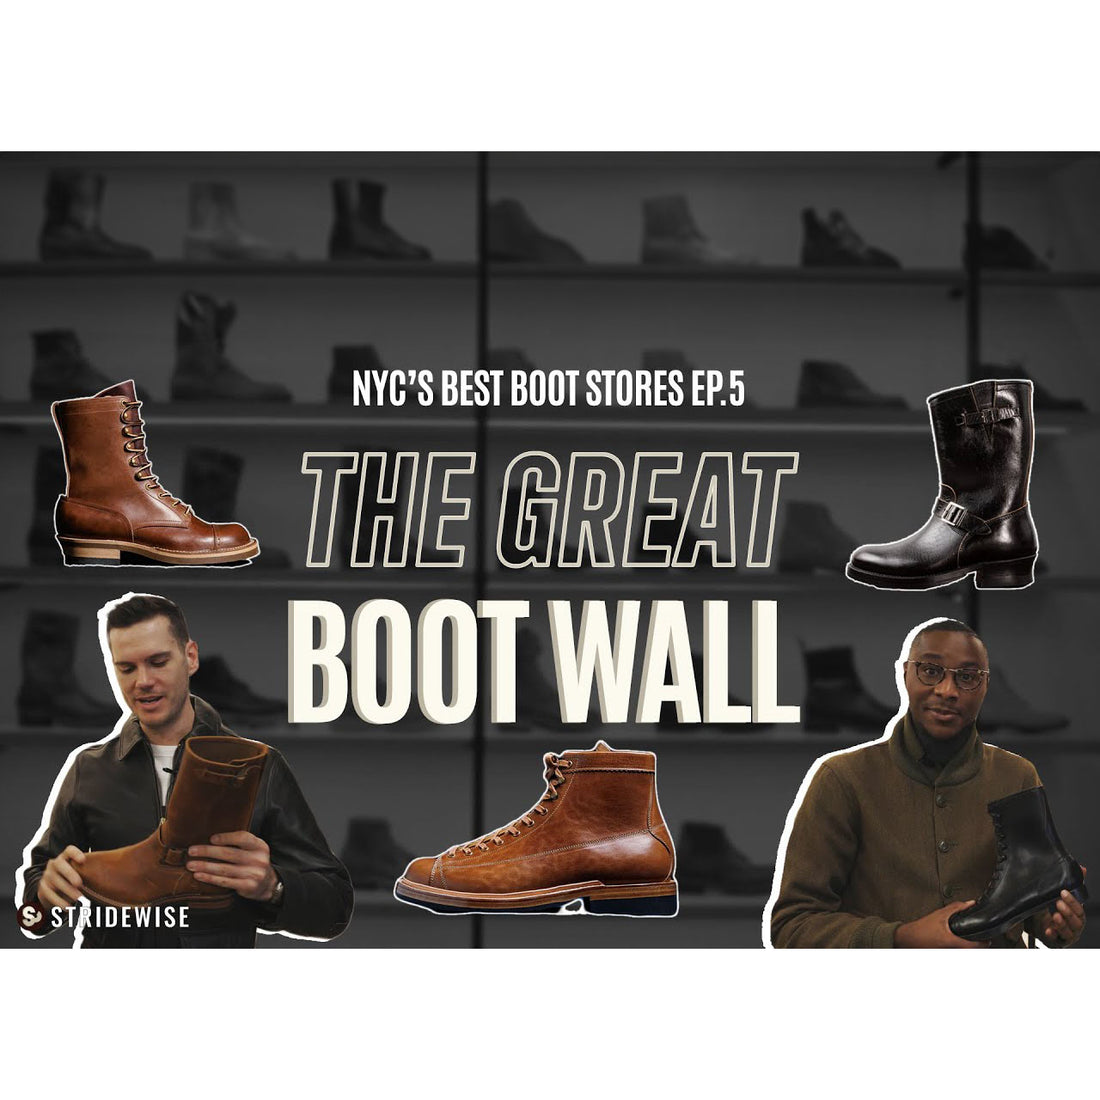 NYC's Best Boot Stores: Stridewise Visits S&S NYC